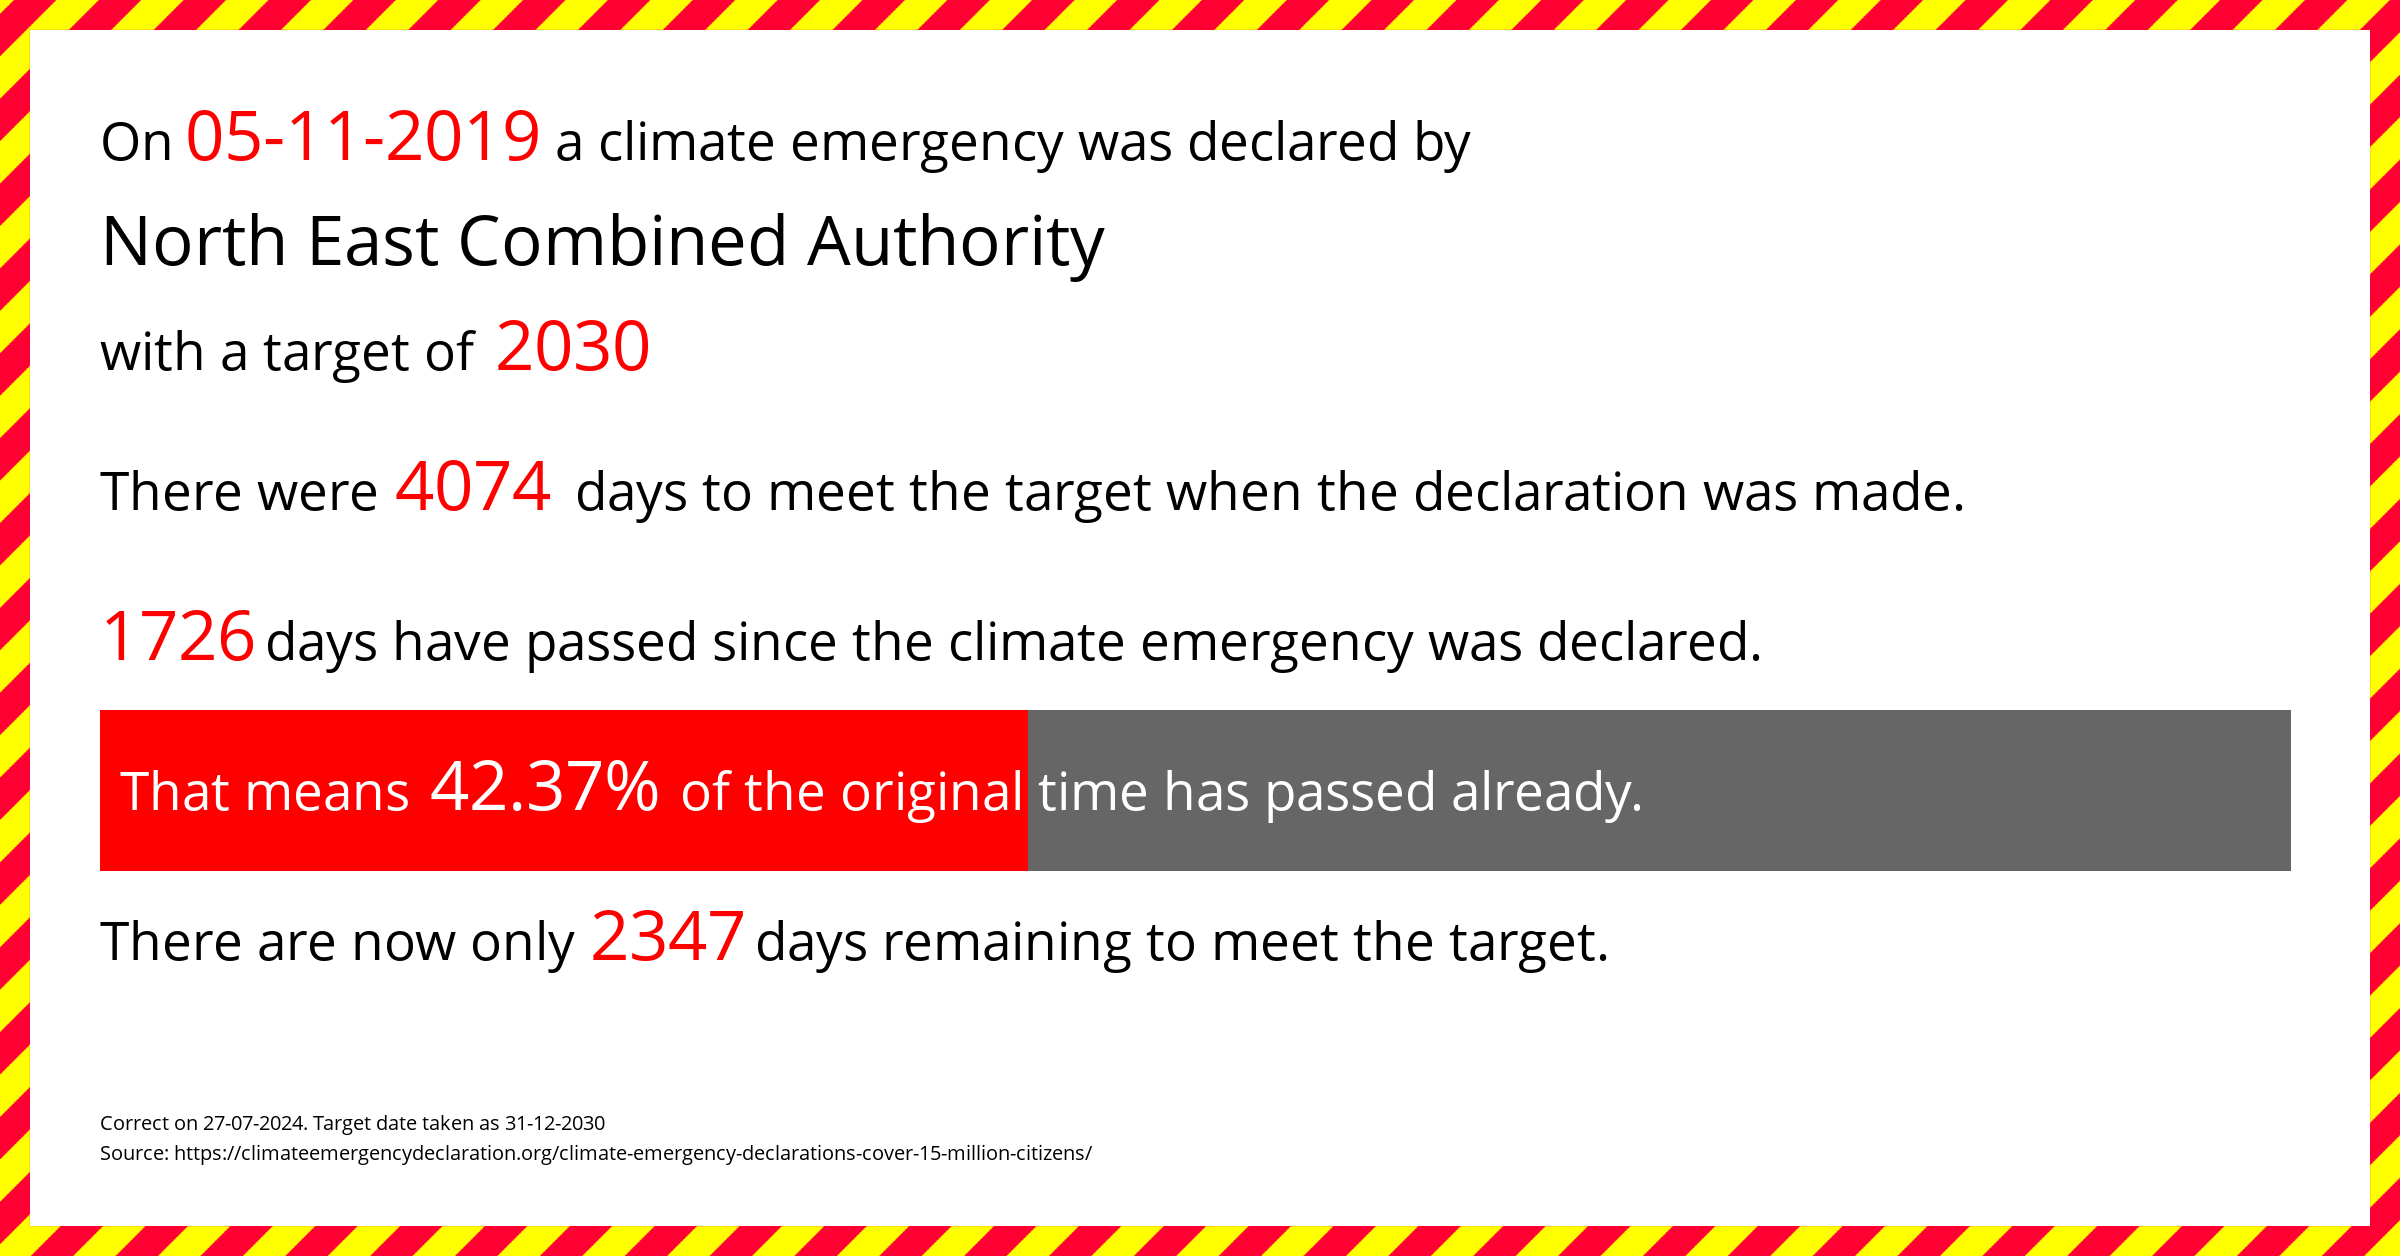 North East Combined Authority declared a Climate emergency on Tuesday 5th November 2019, with a target of 2030.